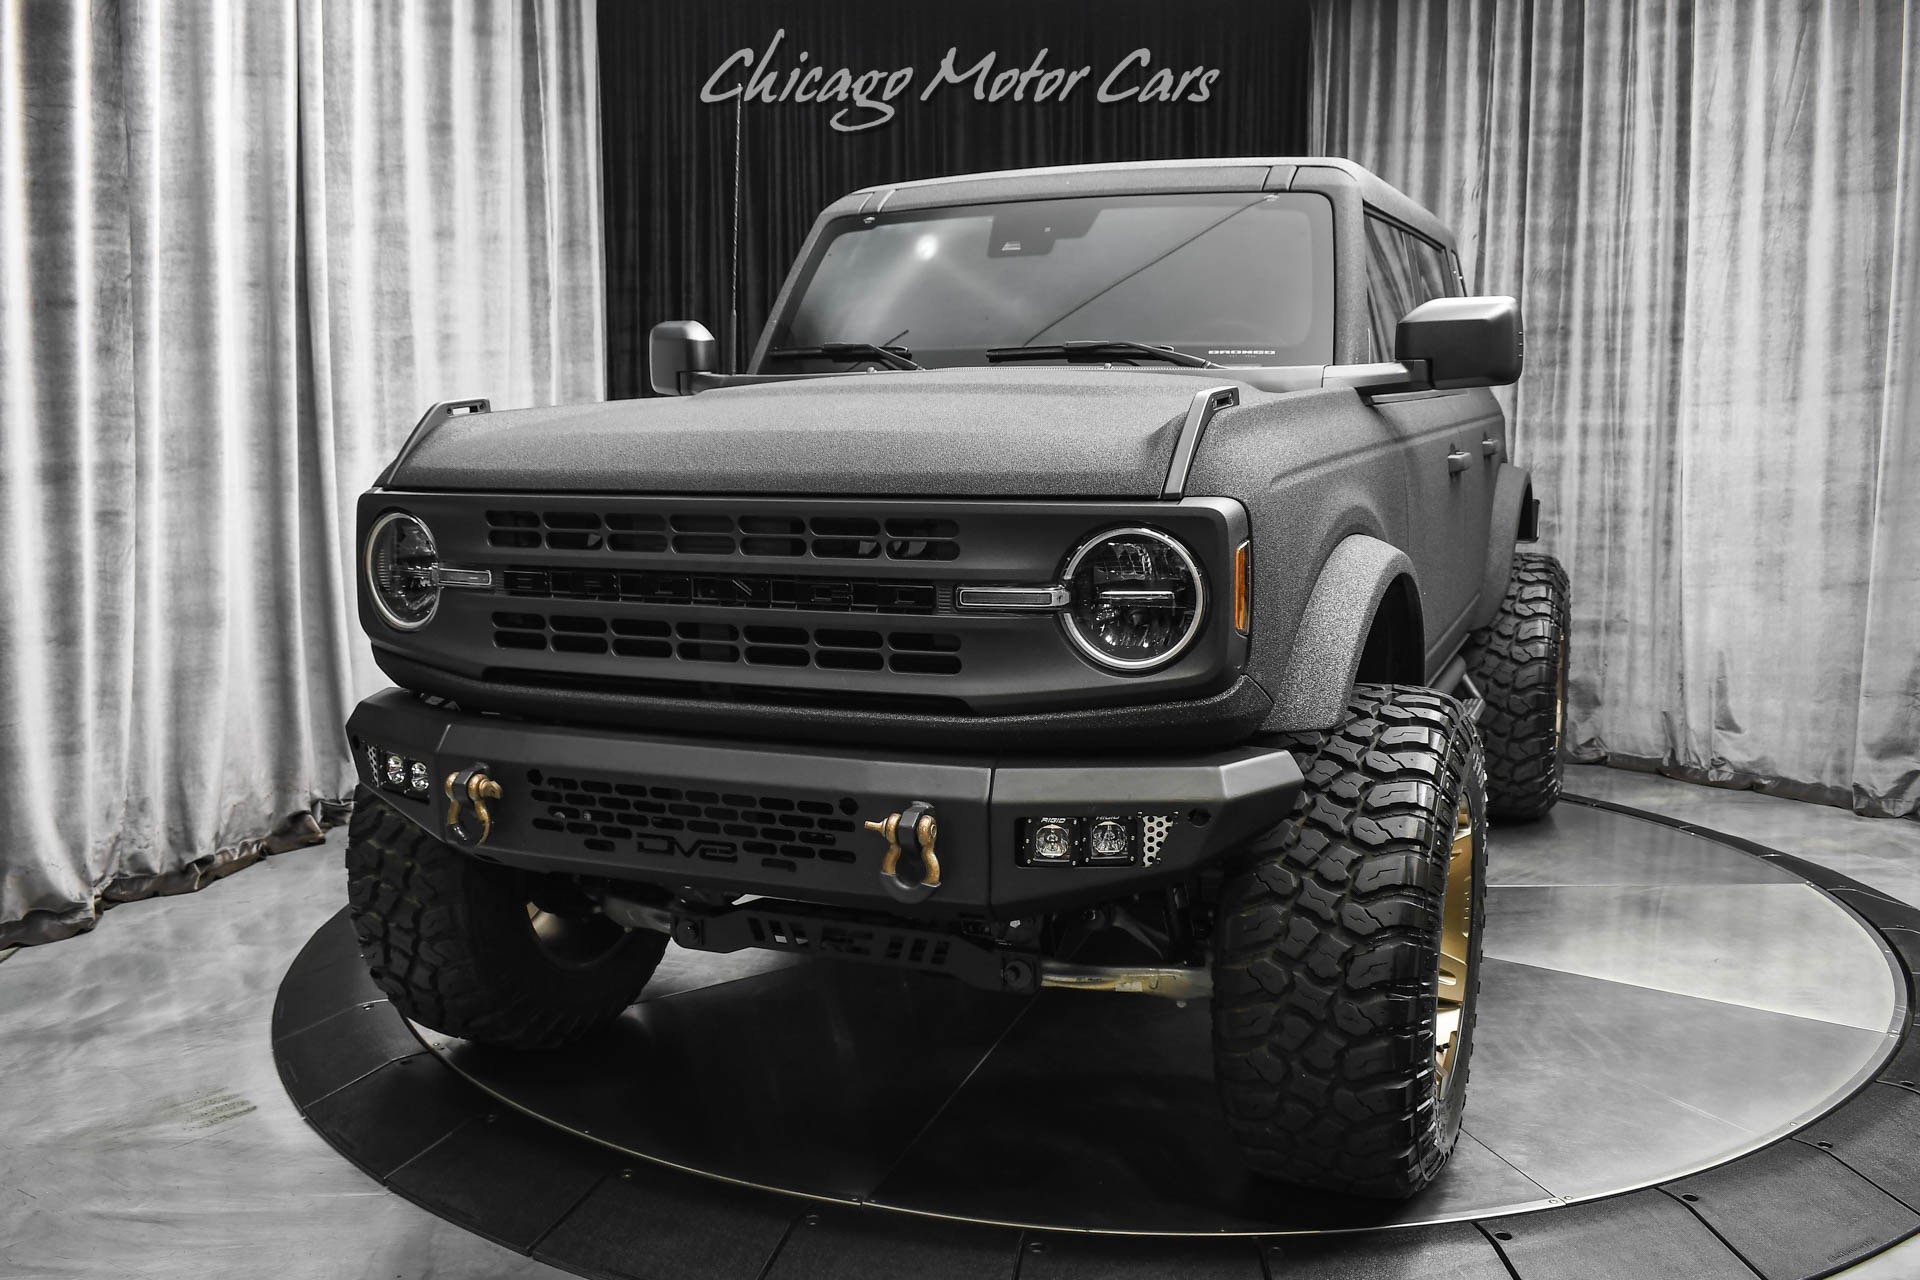 Used-2023-Ford-Bronco-4X4-SUV-50K-in-UPGRADES-Kevlar-Coating-27L-EcoBoost-ONLY-1700-MILES